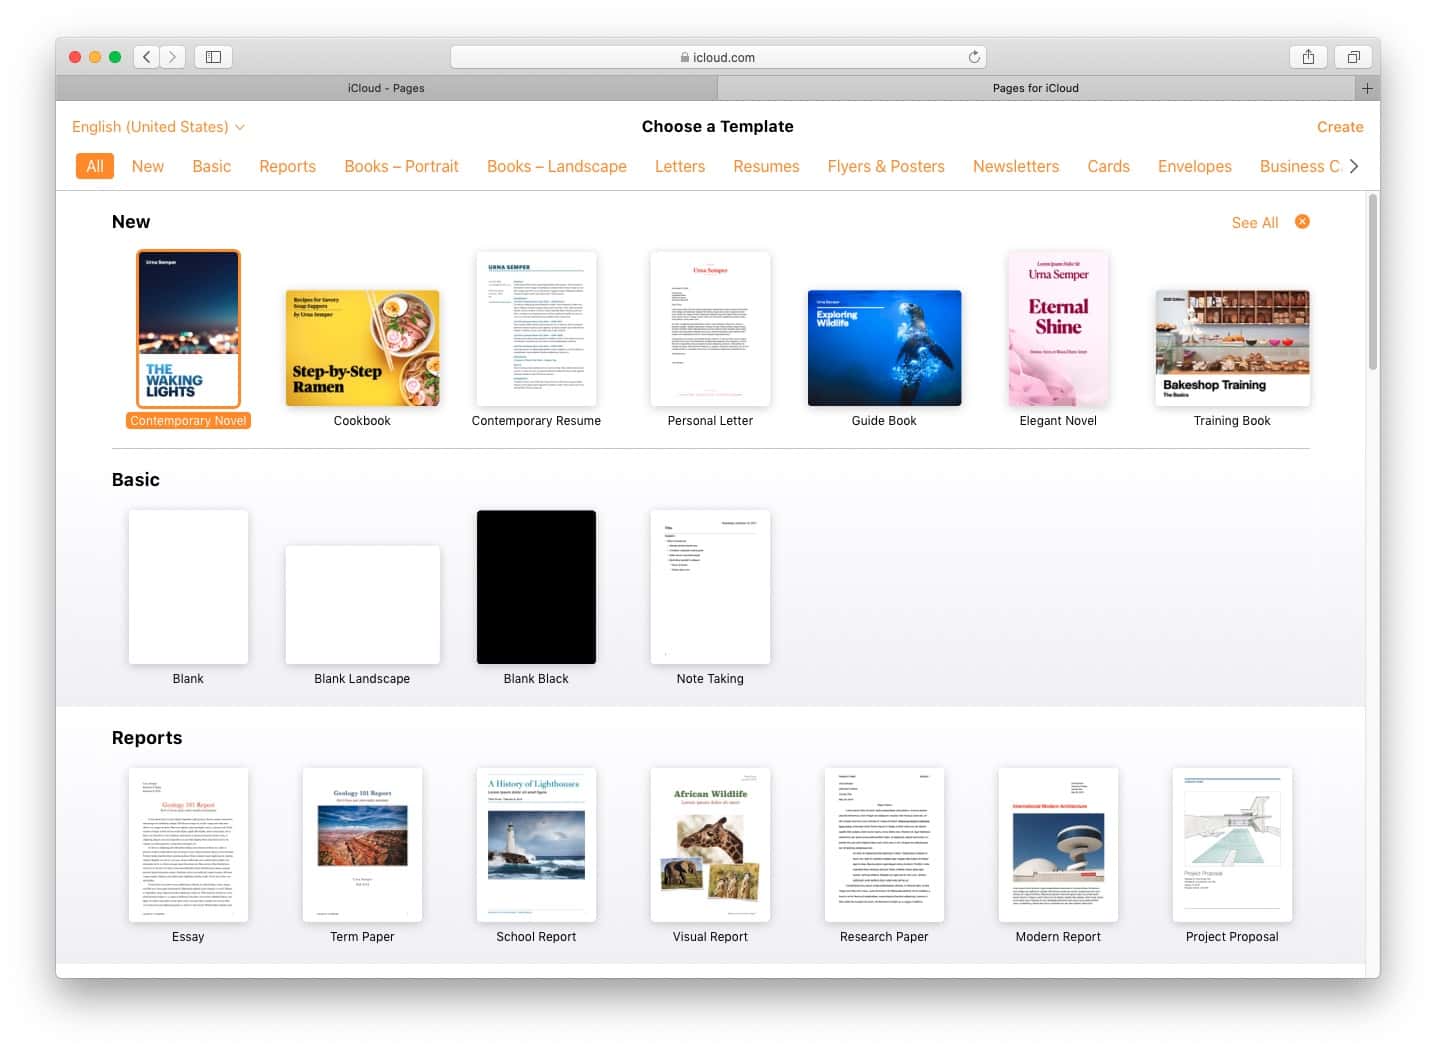 How to Use Pages on iCloud - Selecting a Template